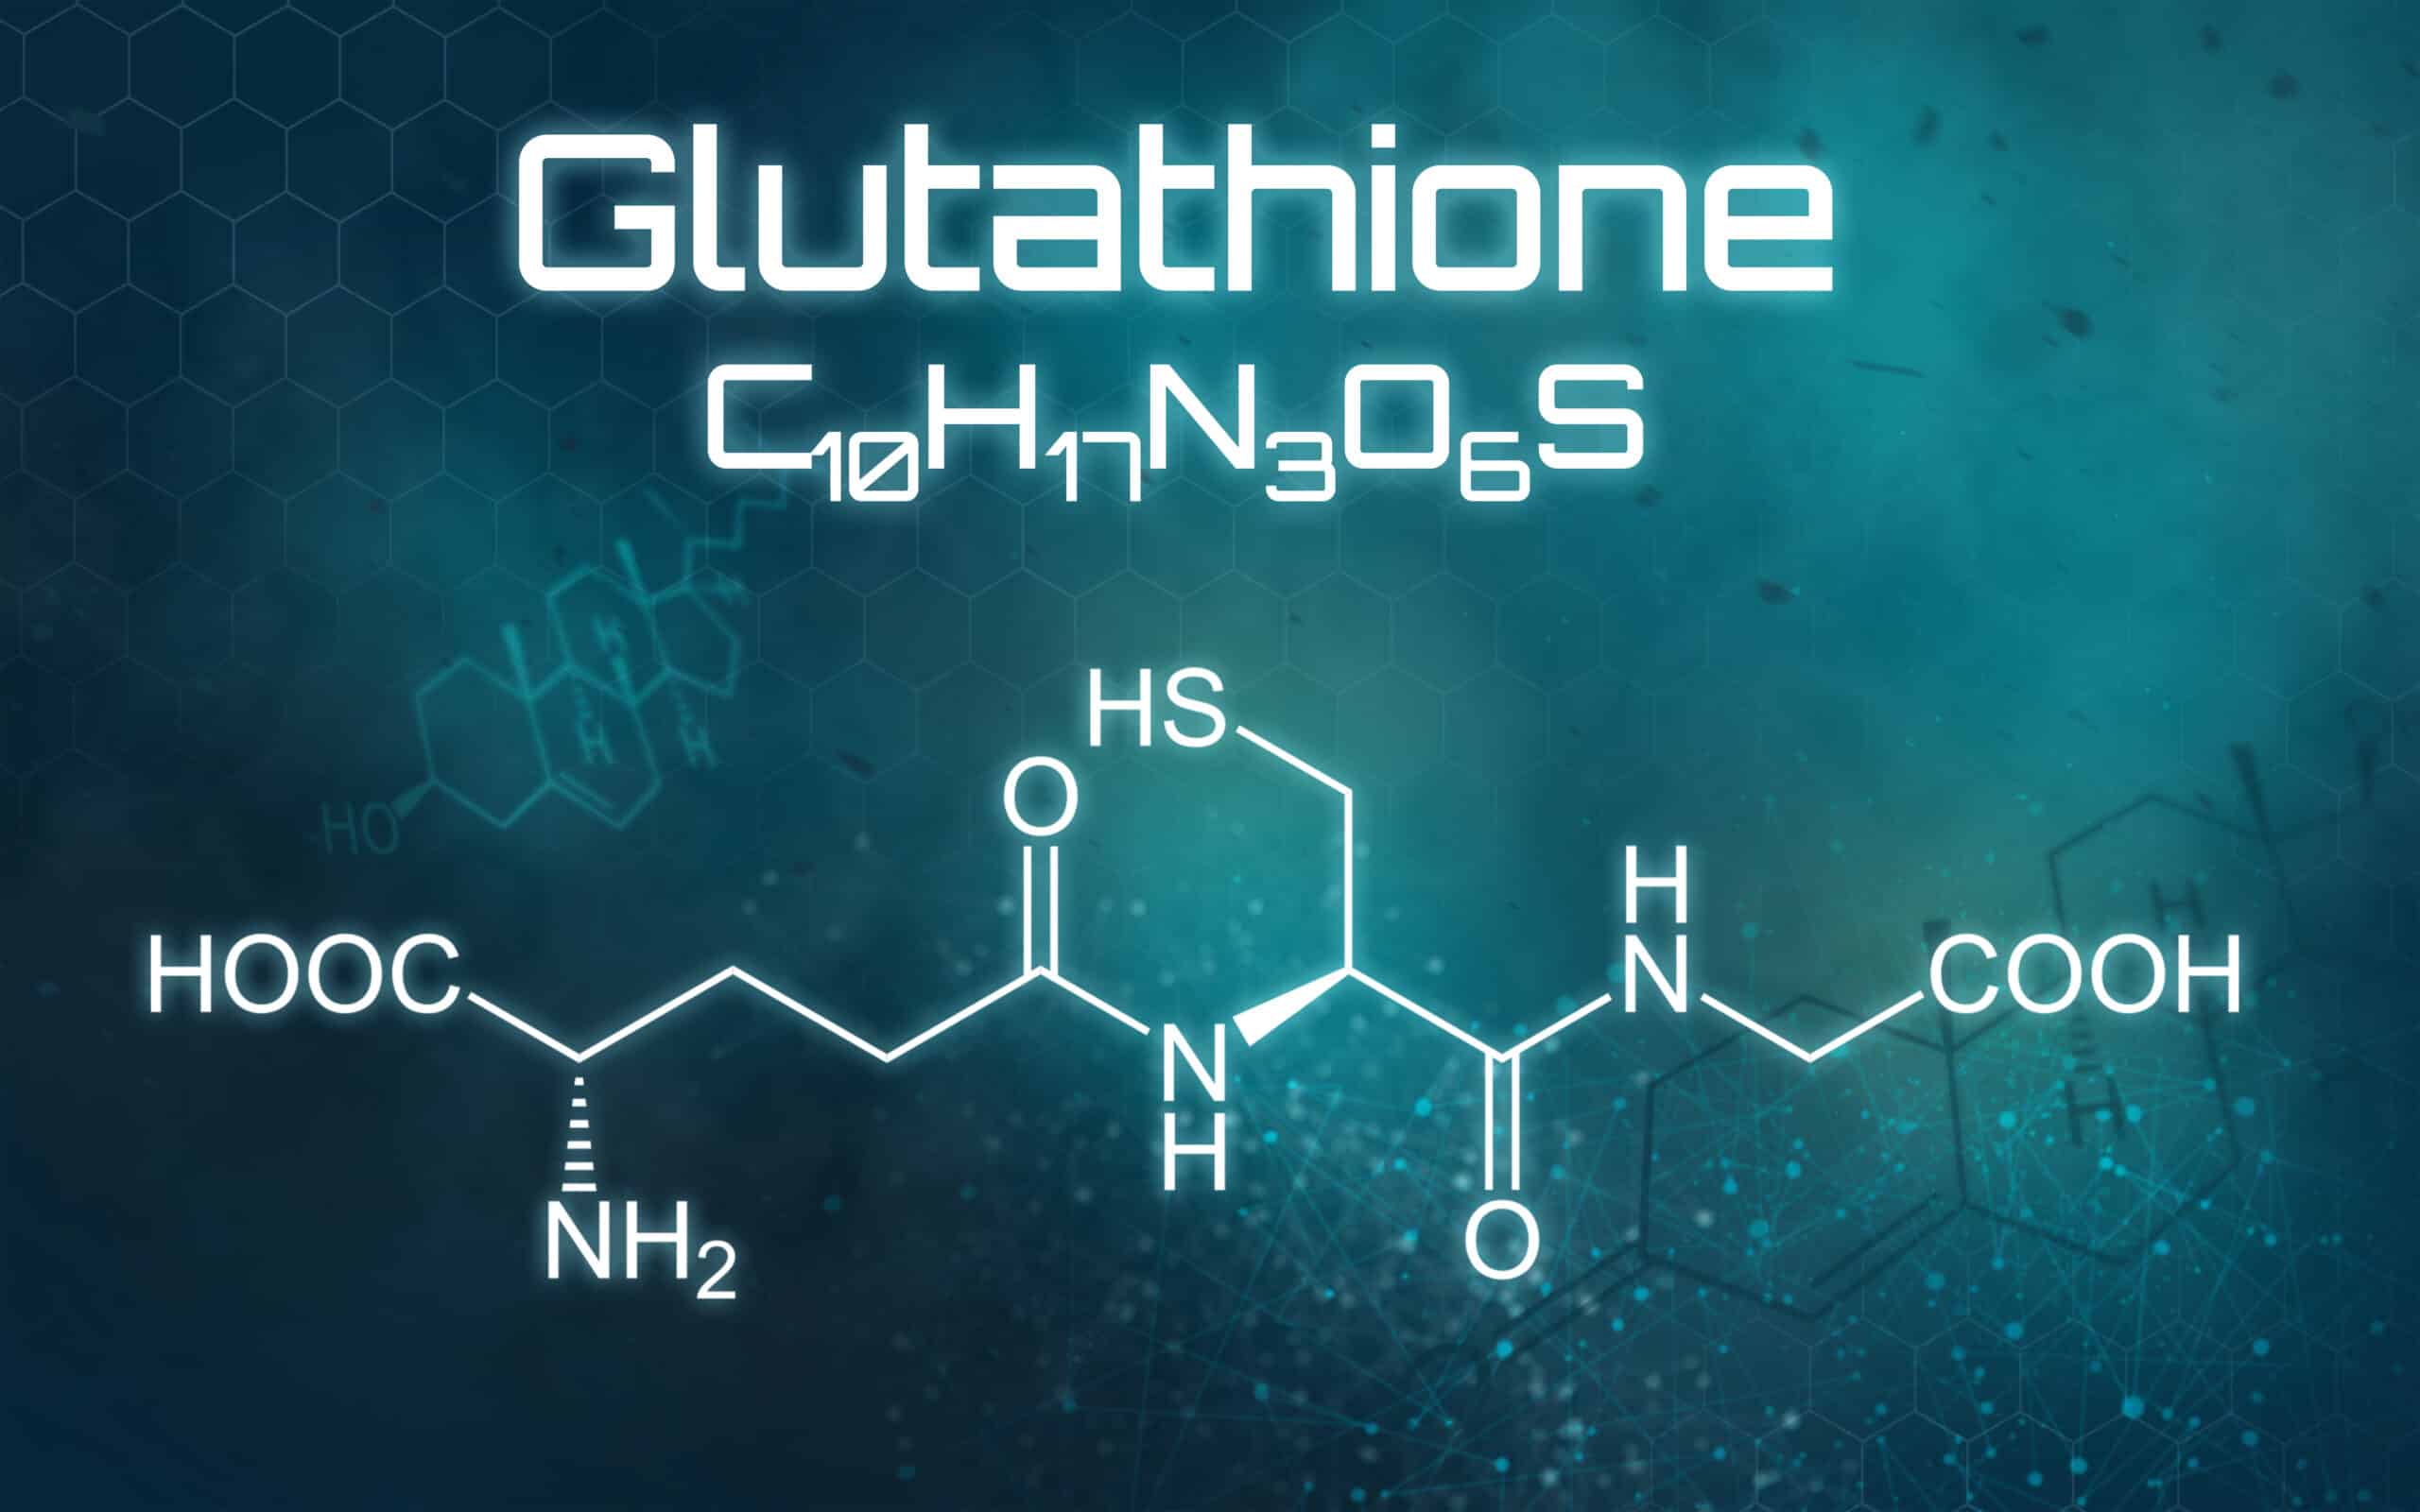 An image of the glutathione chemical compound